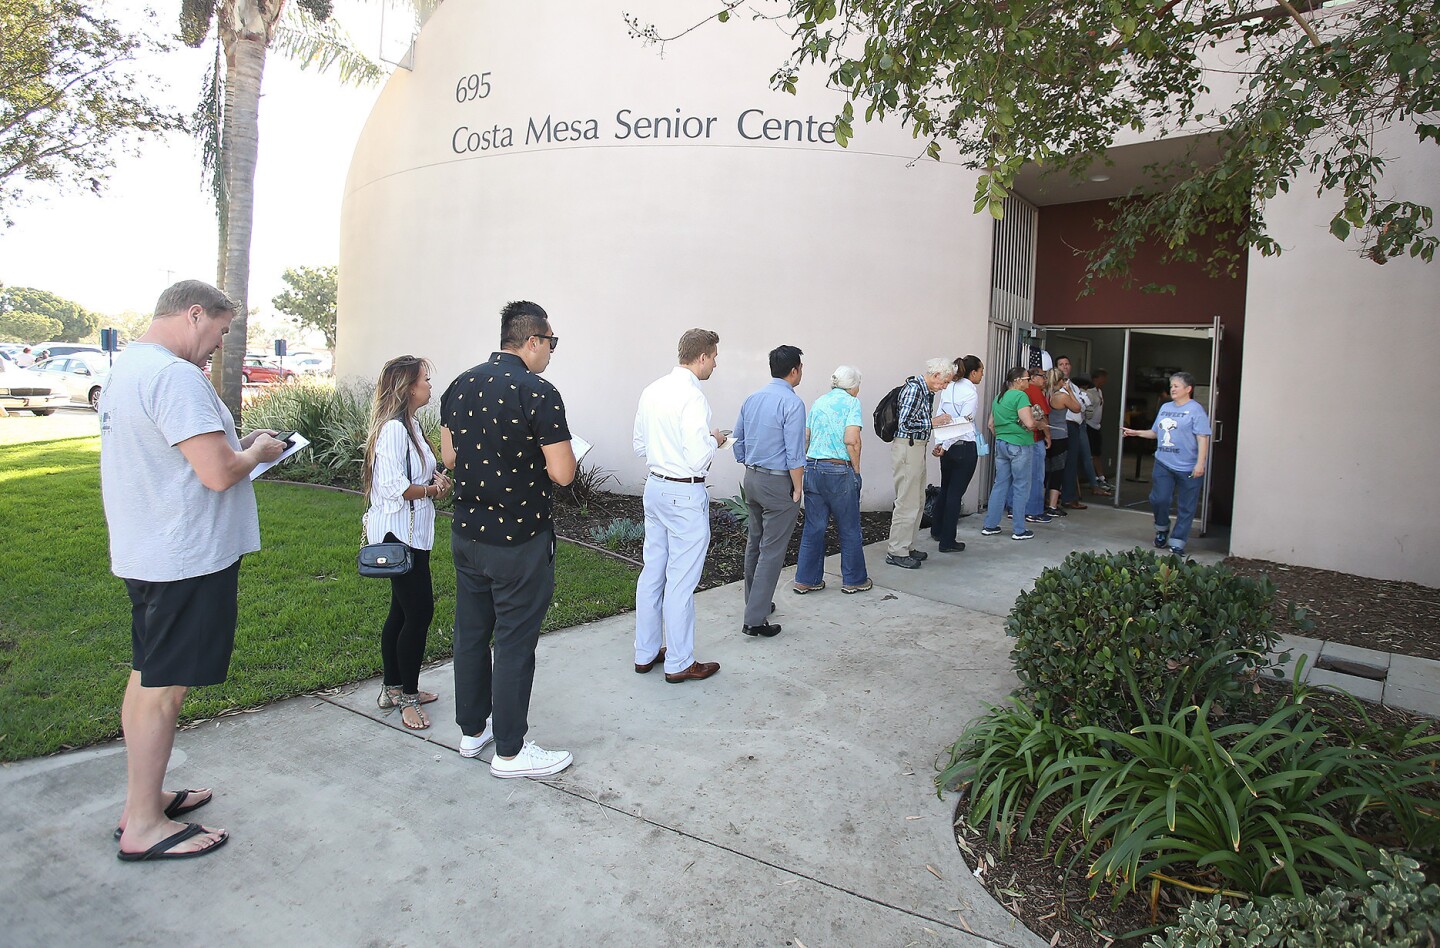 Polling place inspector Laura Bejerano, right, fields questions as voters line up at the Costa Mesa Senior Center on 19th Street on Tuesday, Election Day.